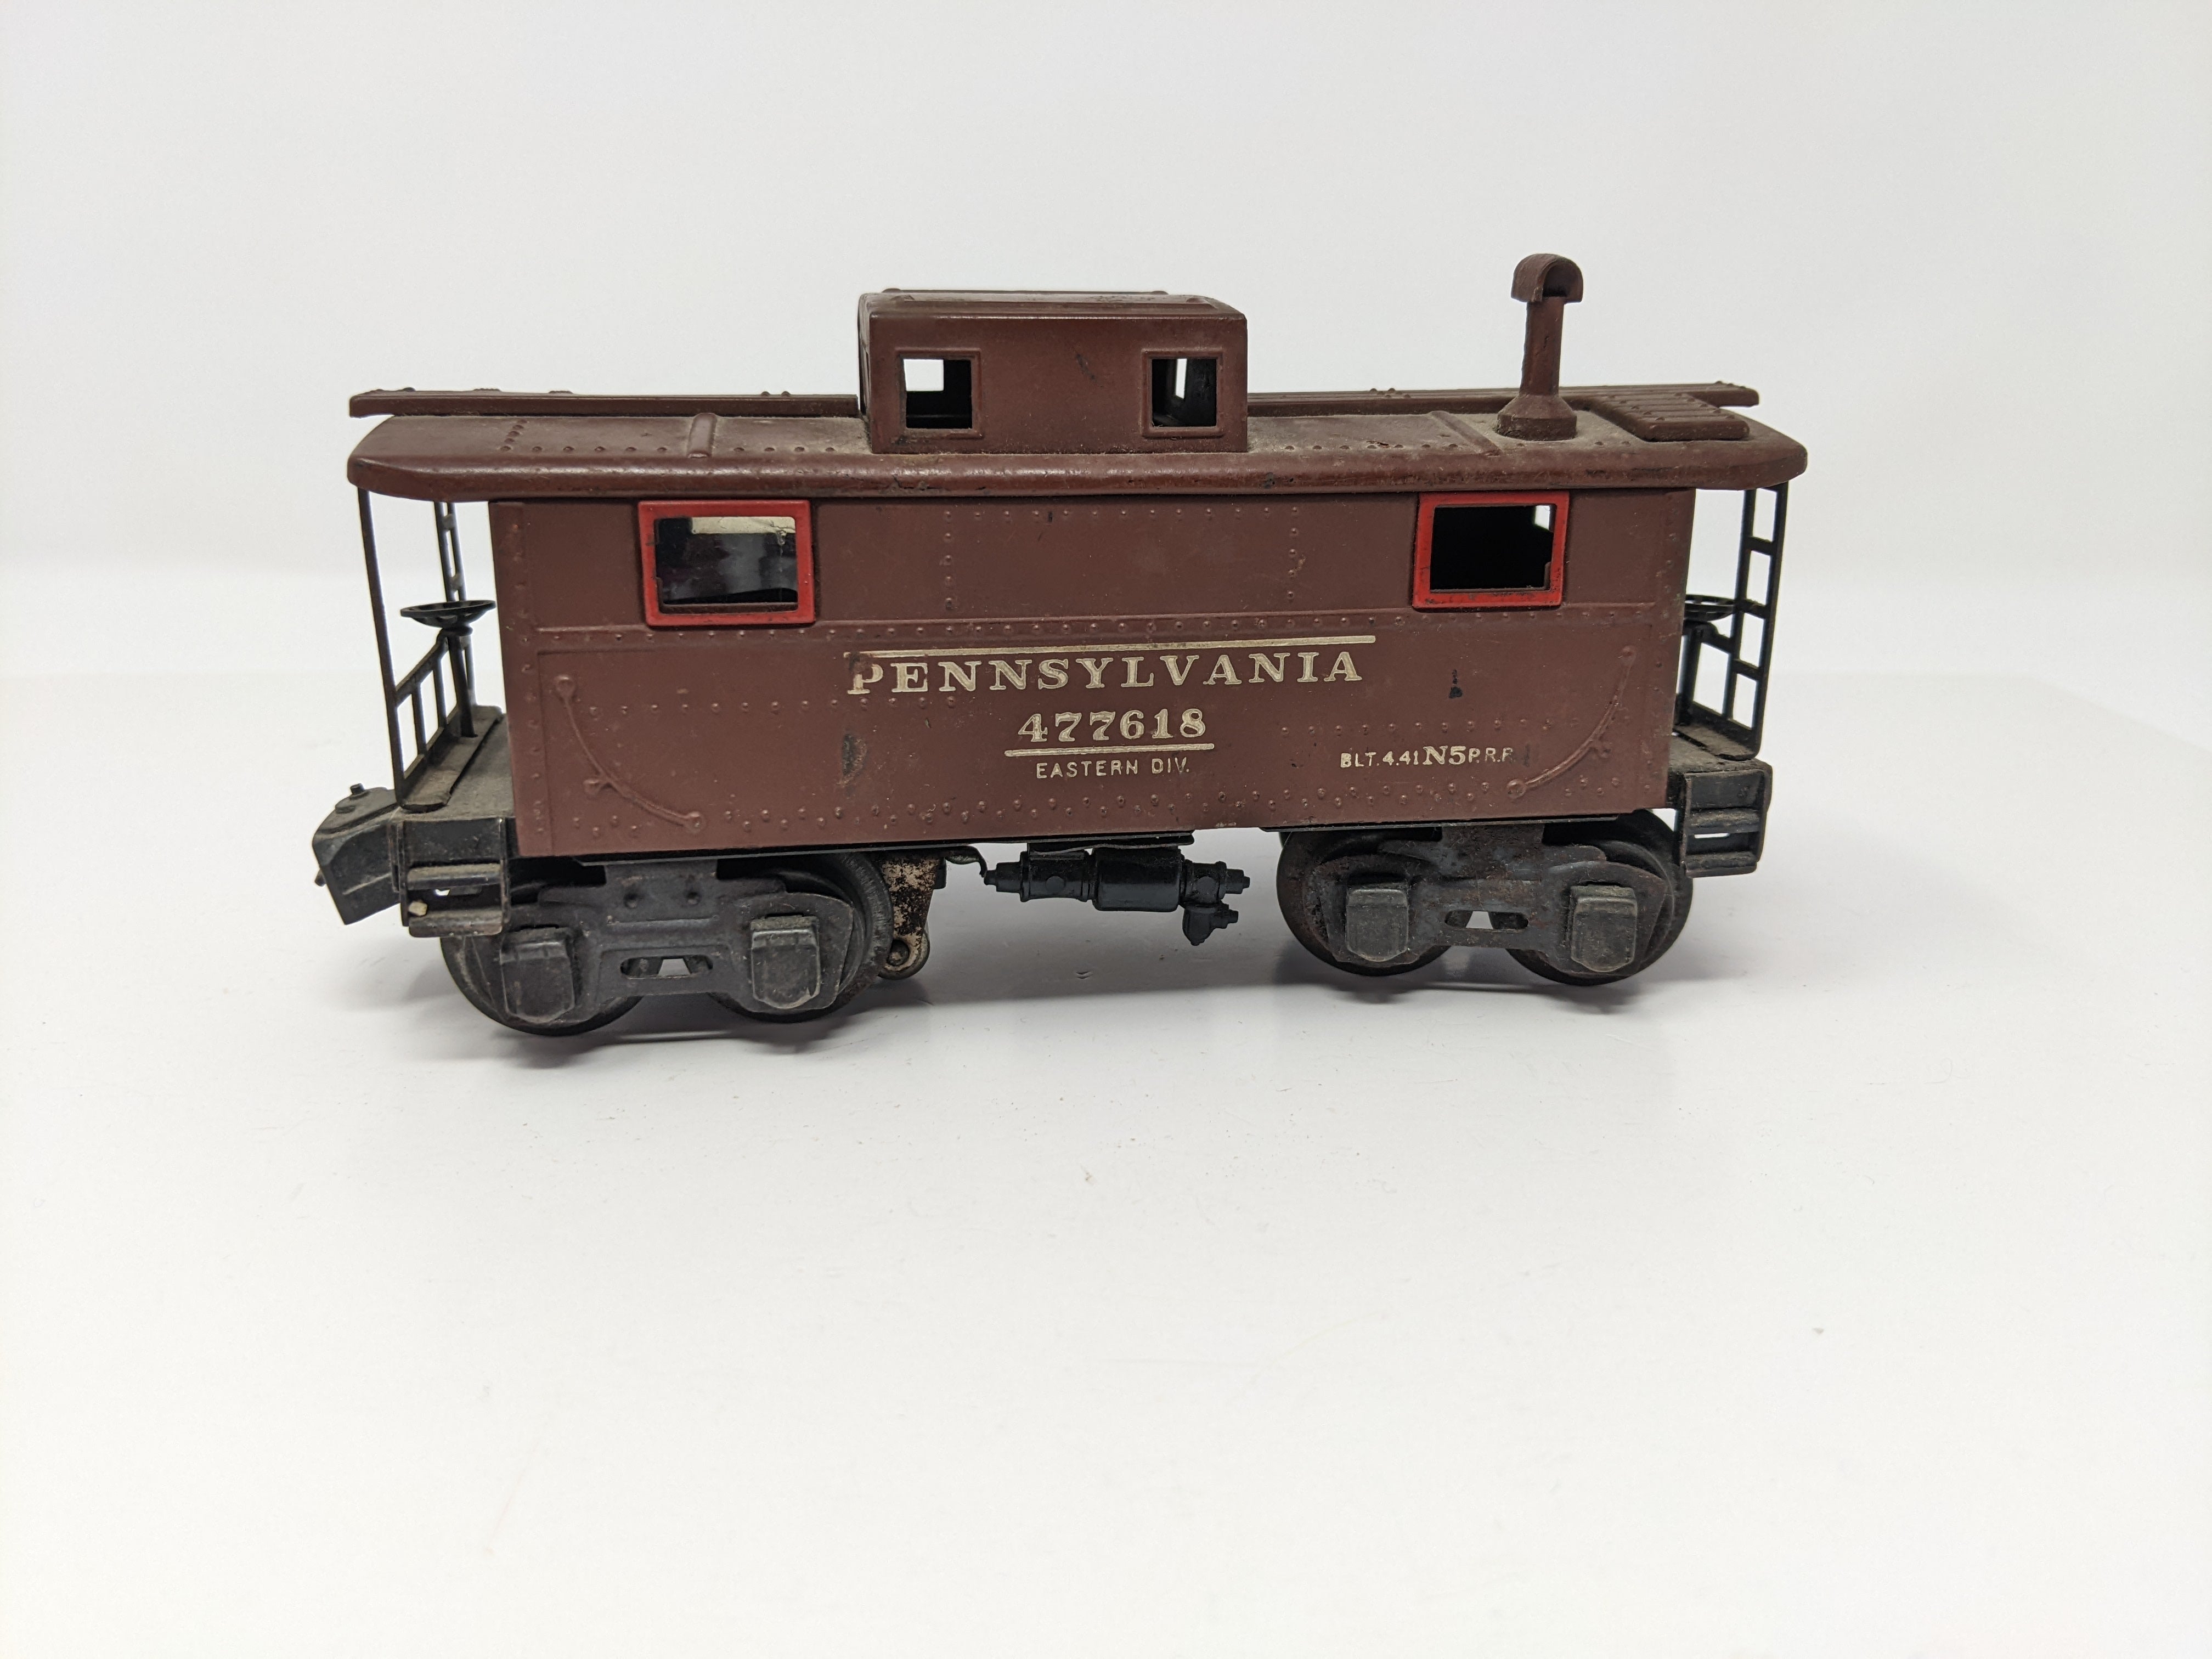 USED Lionel O, Caboose Pennsylvania, #477618, Eastern Division